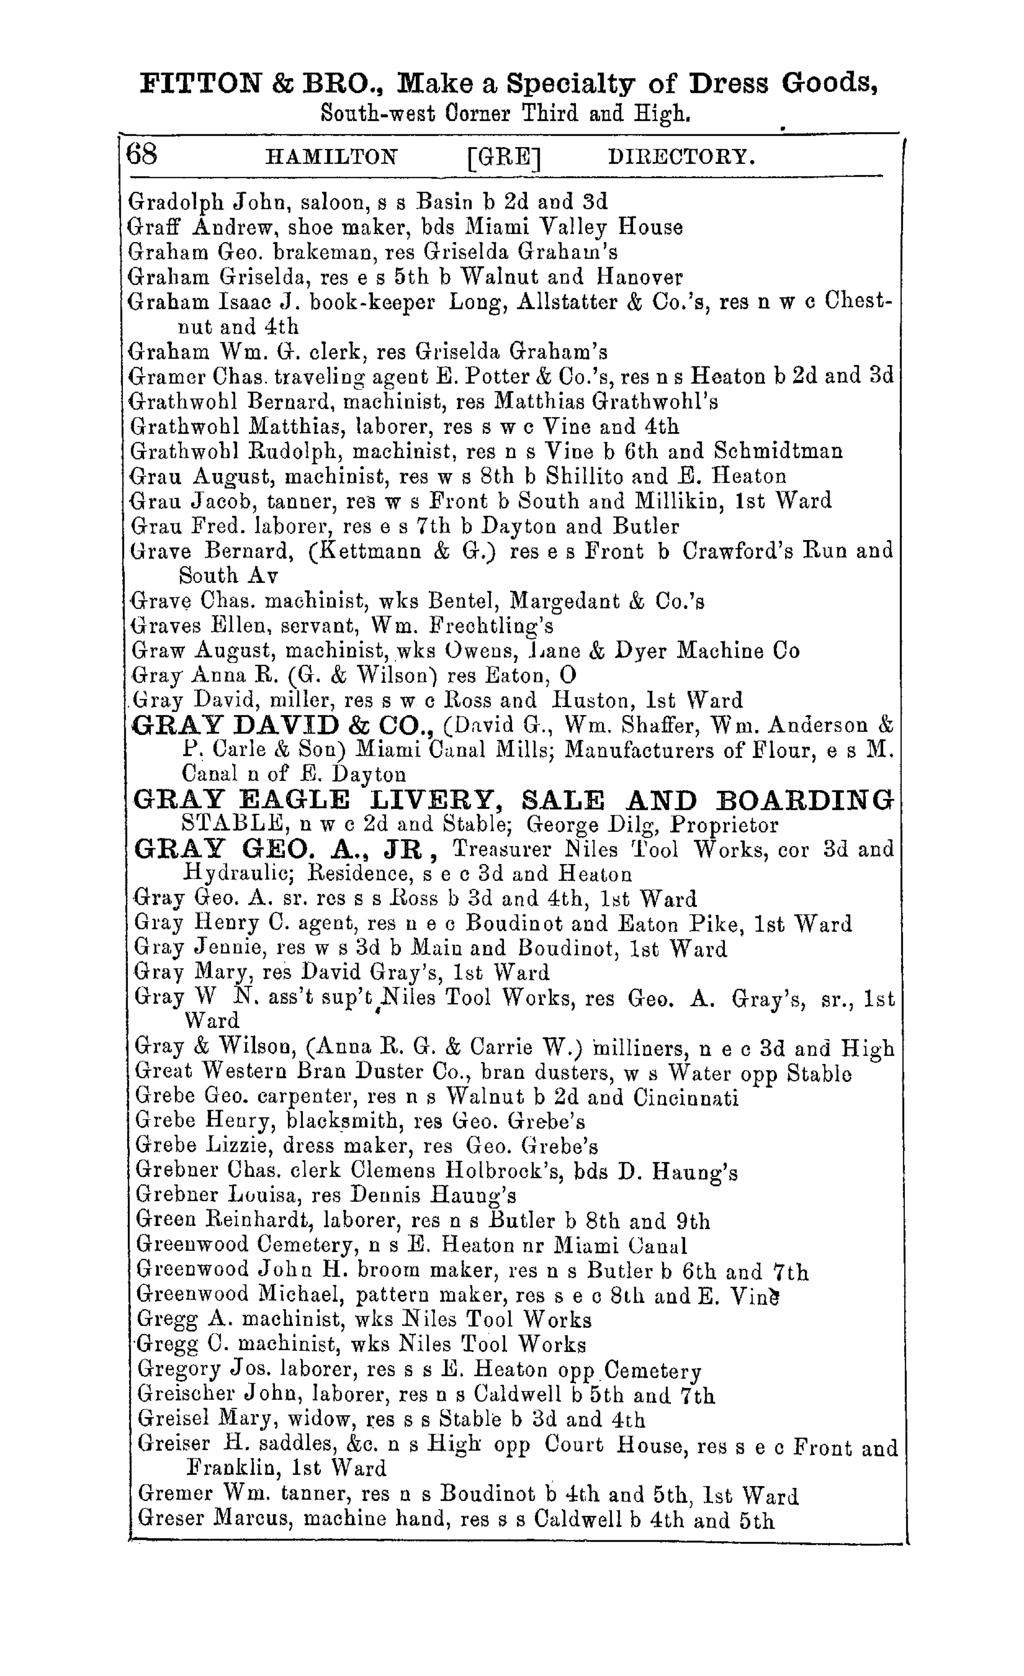 FITTON & BRO., Make a Specialty of Dress Goods, South-west Corner Third and High. 68 HAMILTON [GREJ DIRECTORY.